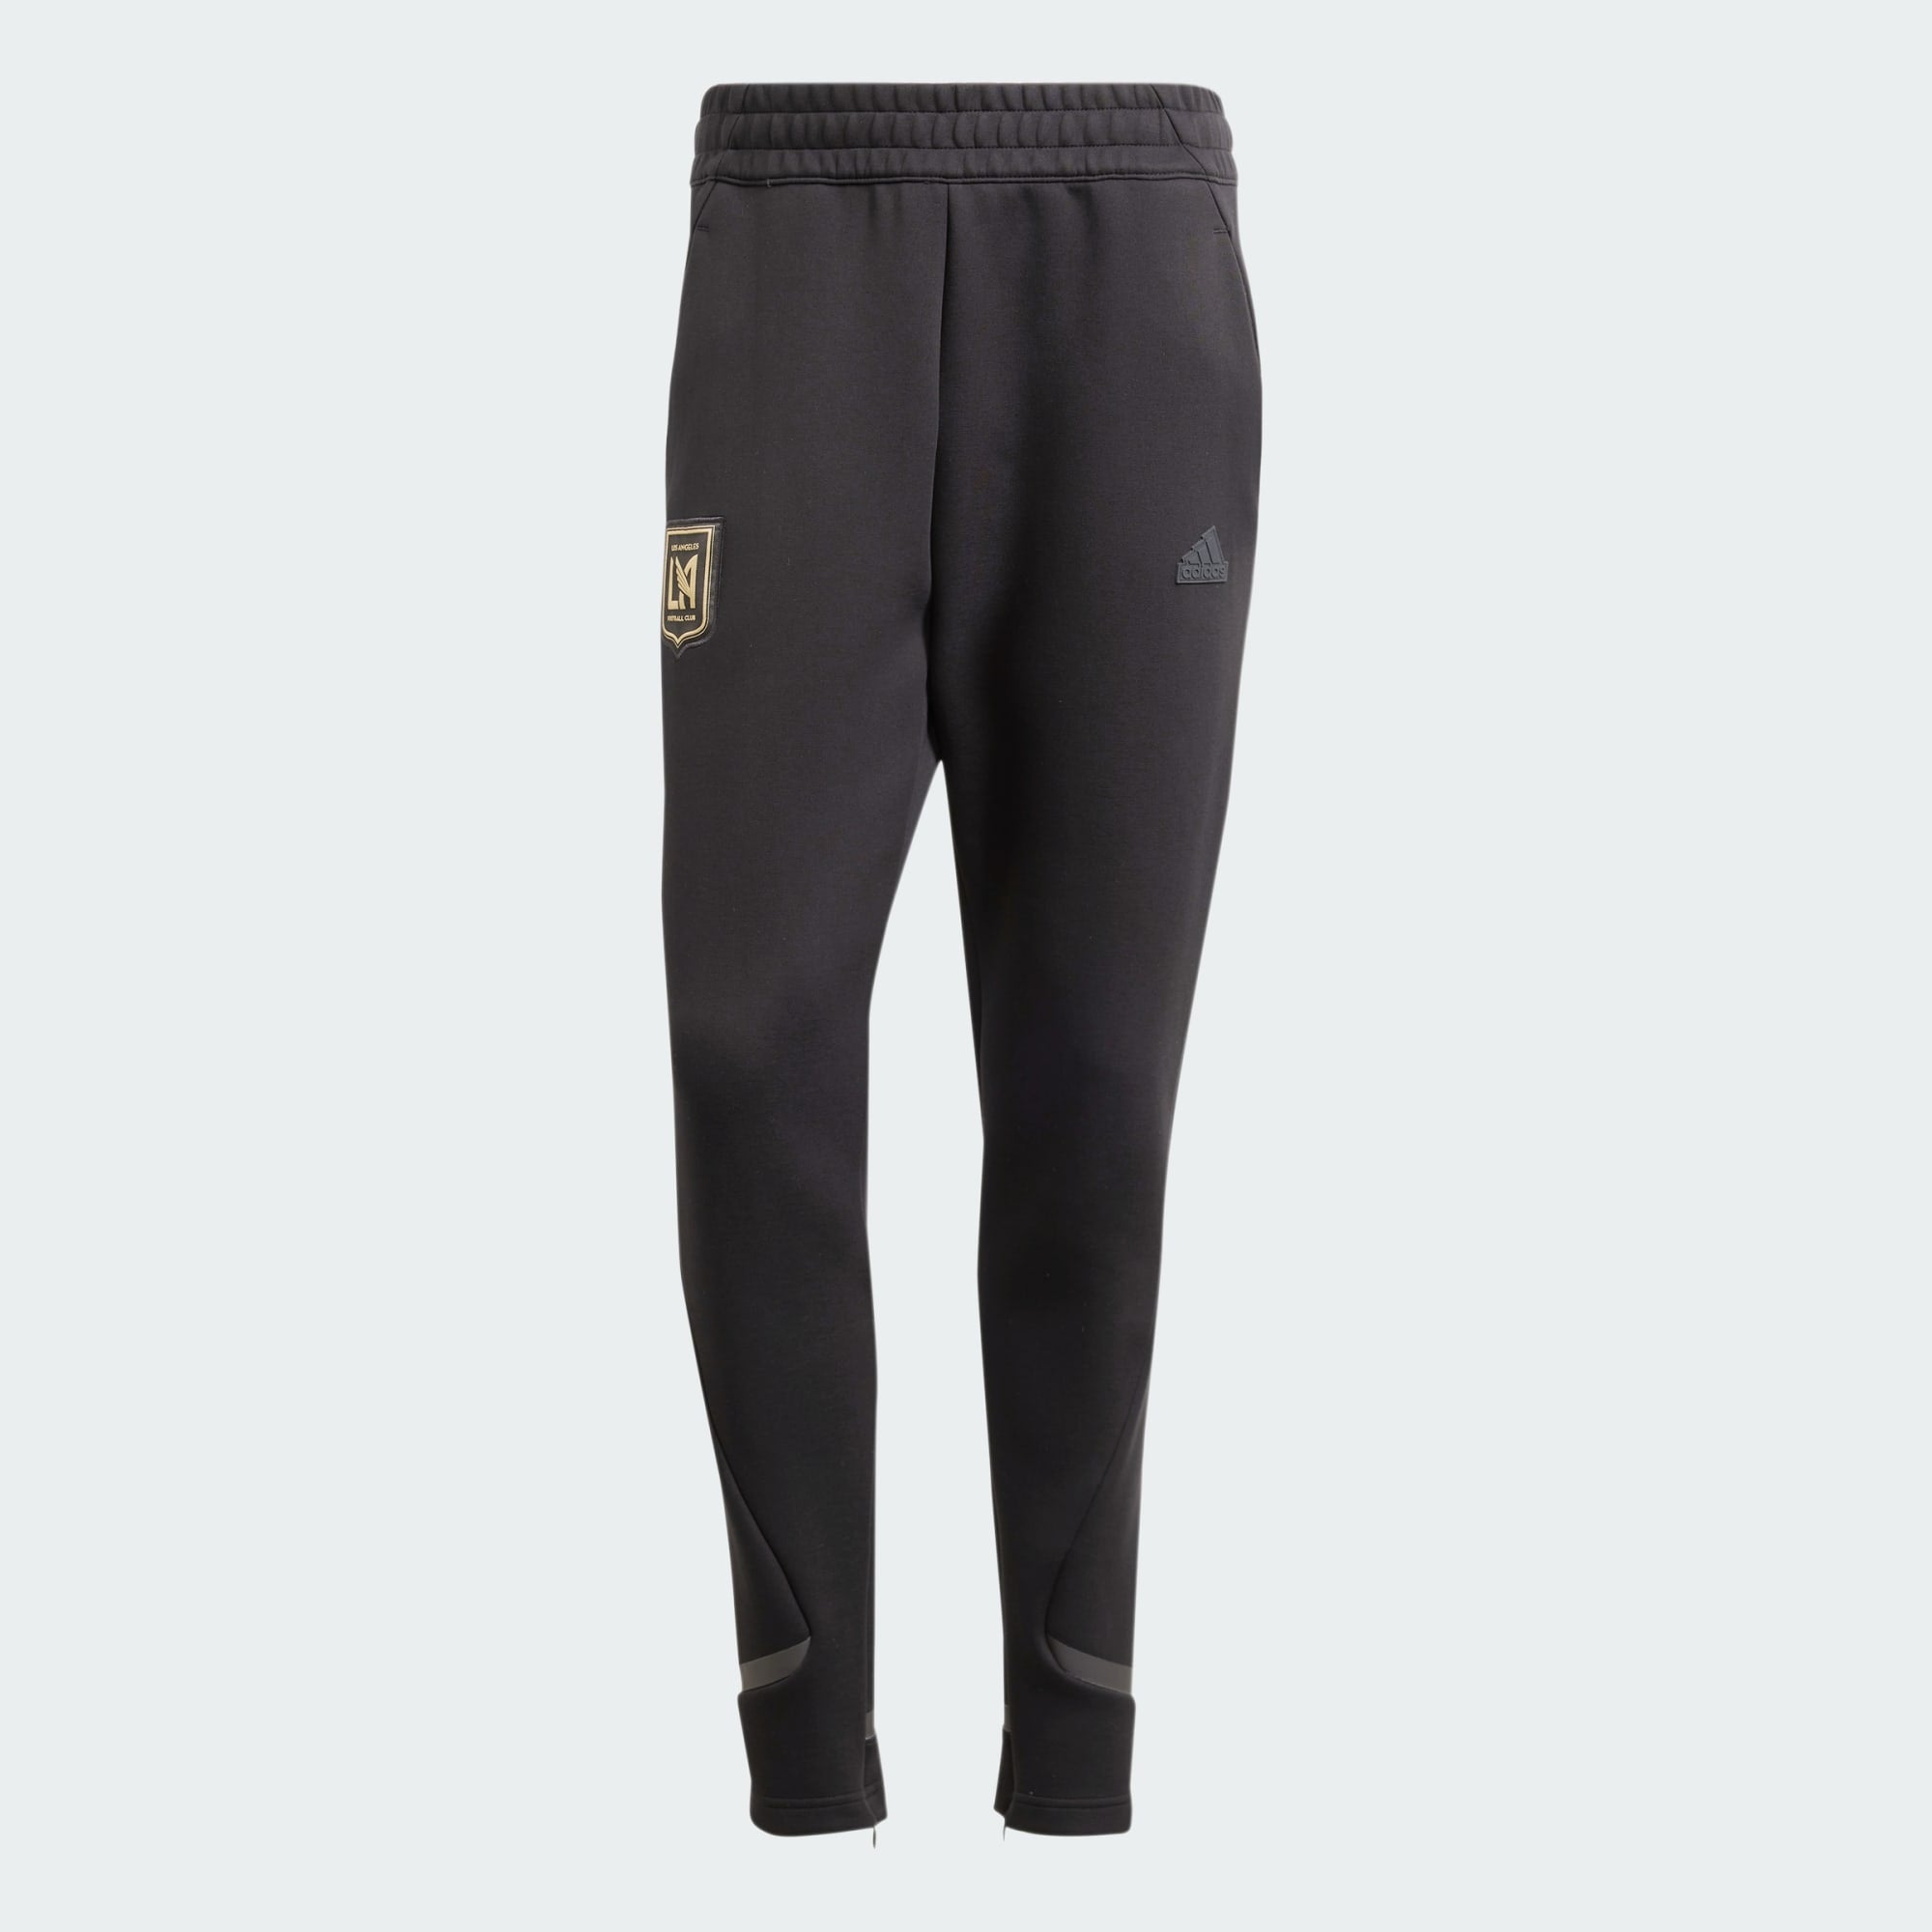 adidas LAFC DESIGNED FOR GAMEDAY TRAVEL PANTS